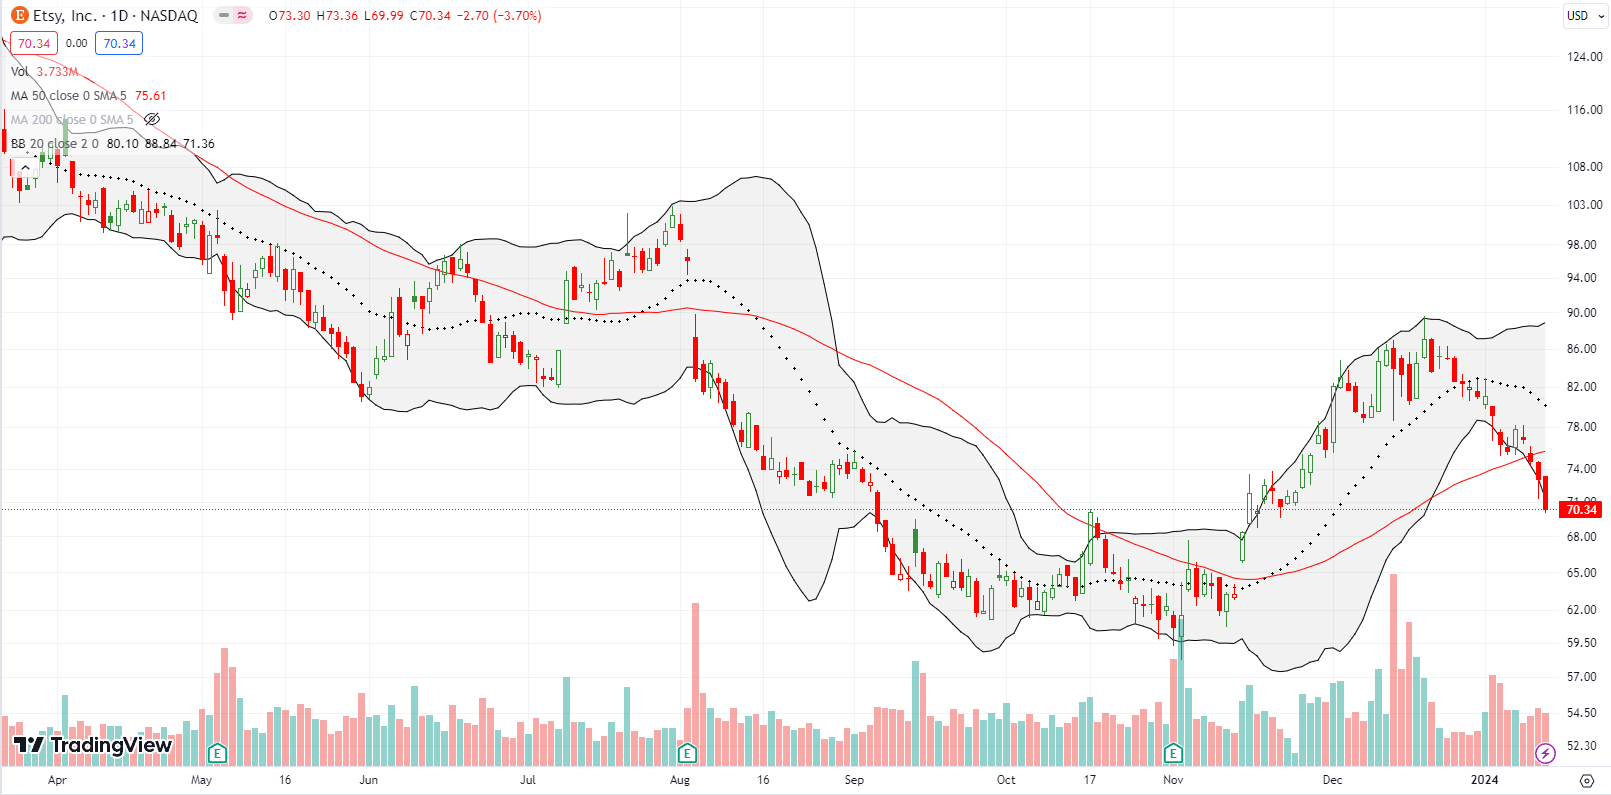 Etsy Inc (ETSY) is hugging its lower Bollinger Band after confirming a 50DMA breakdown.